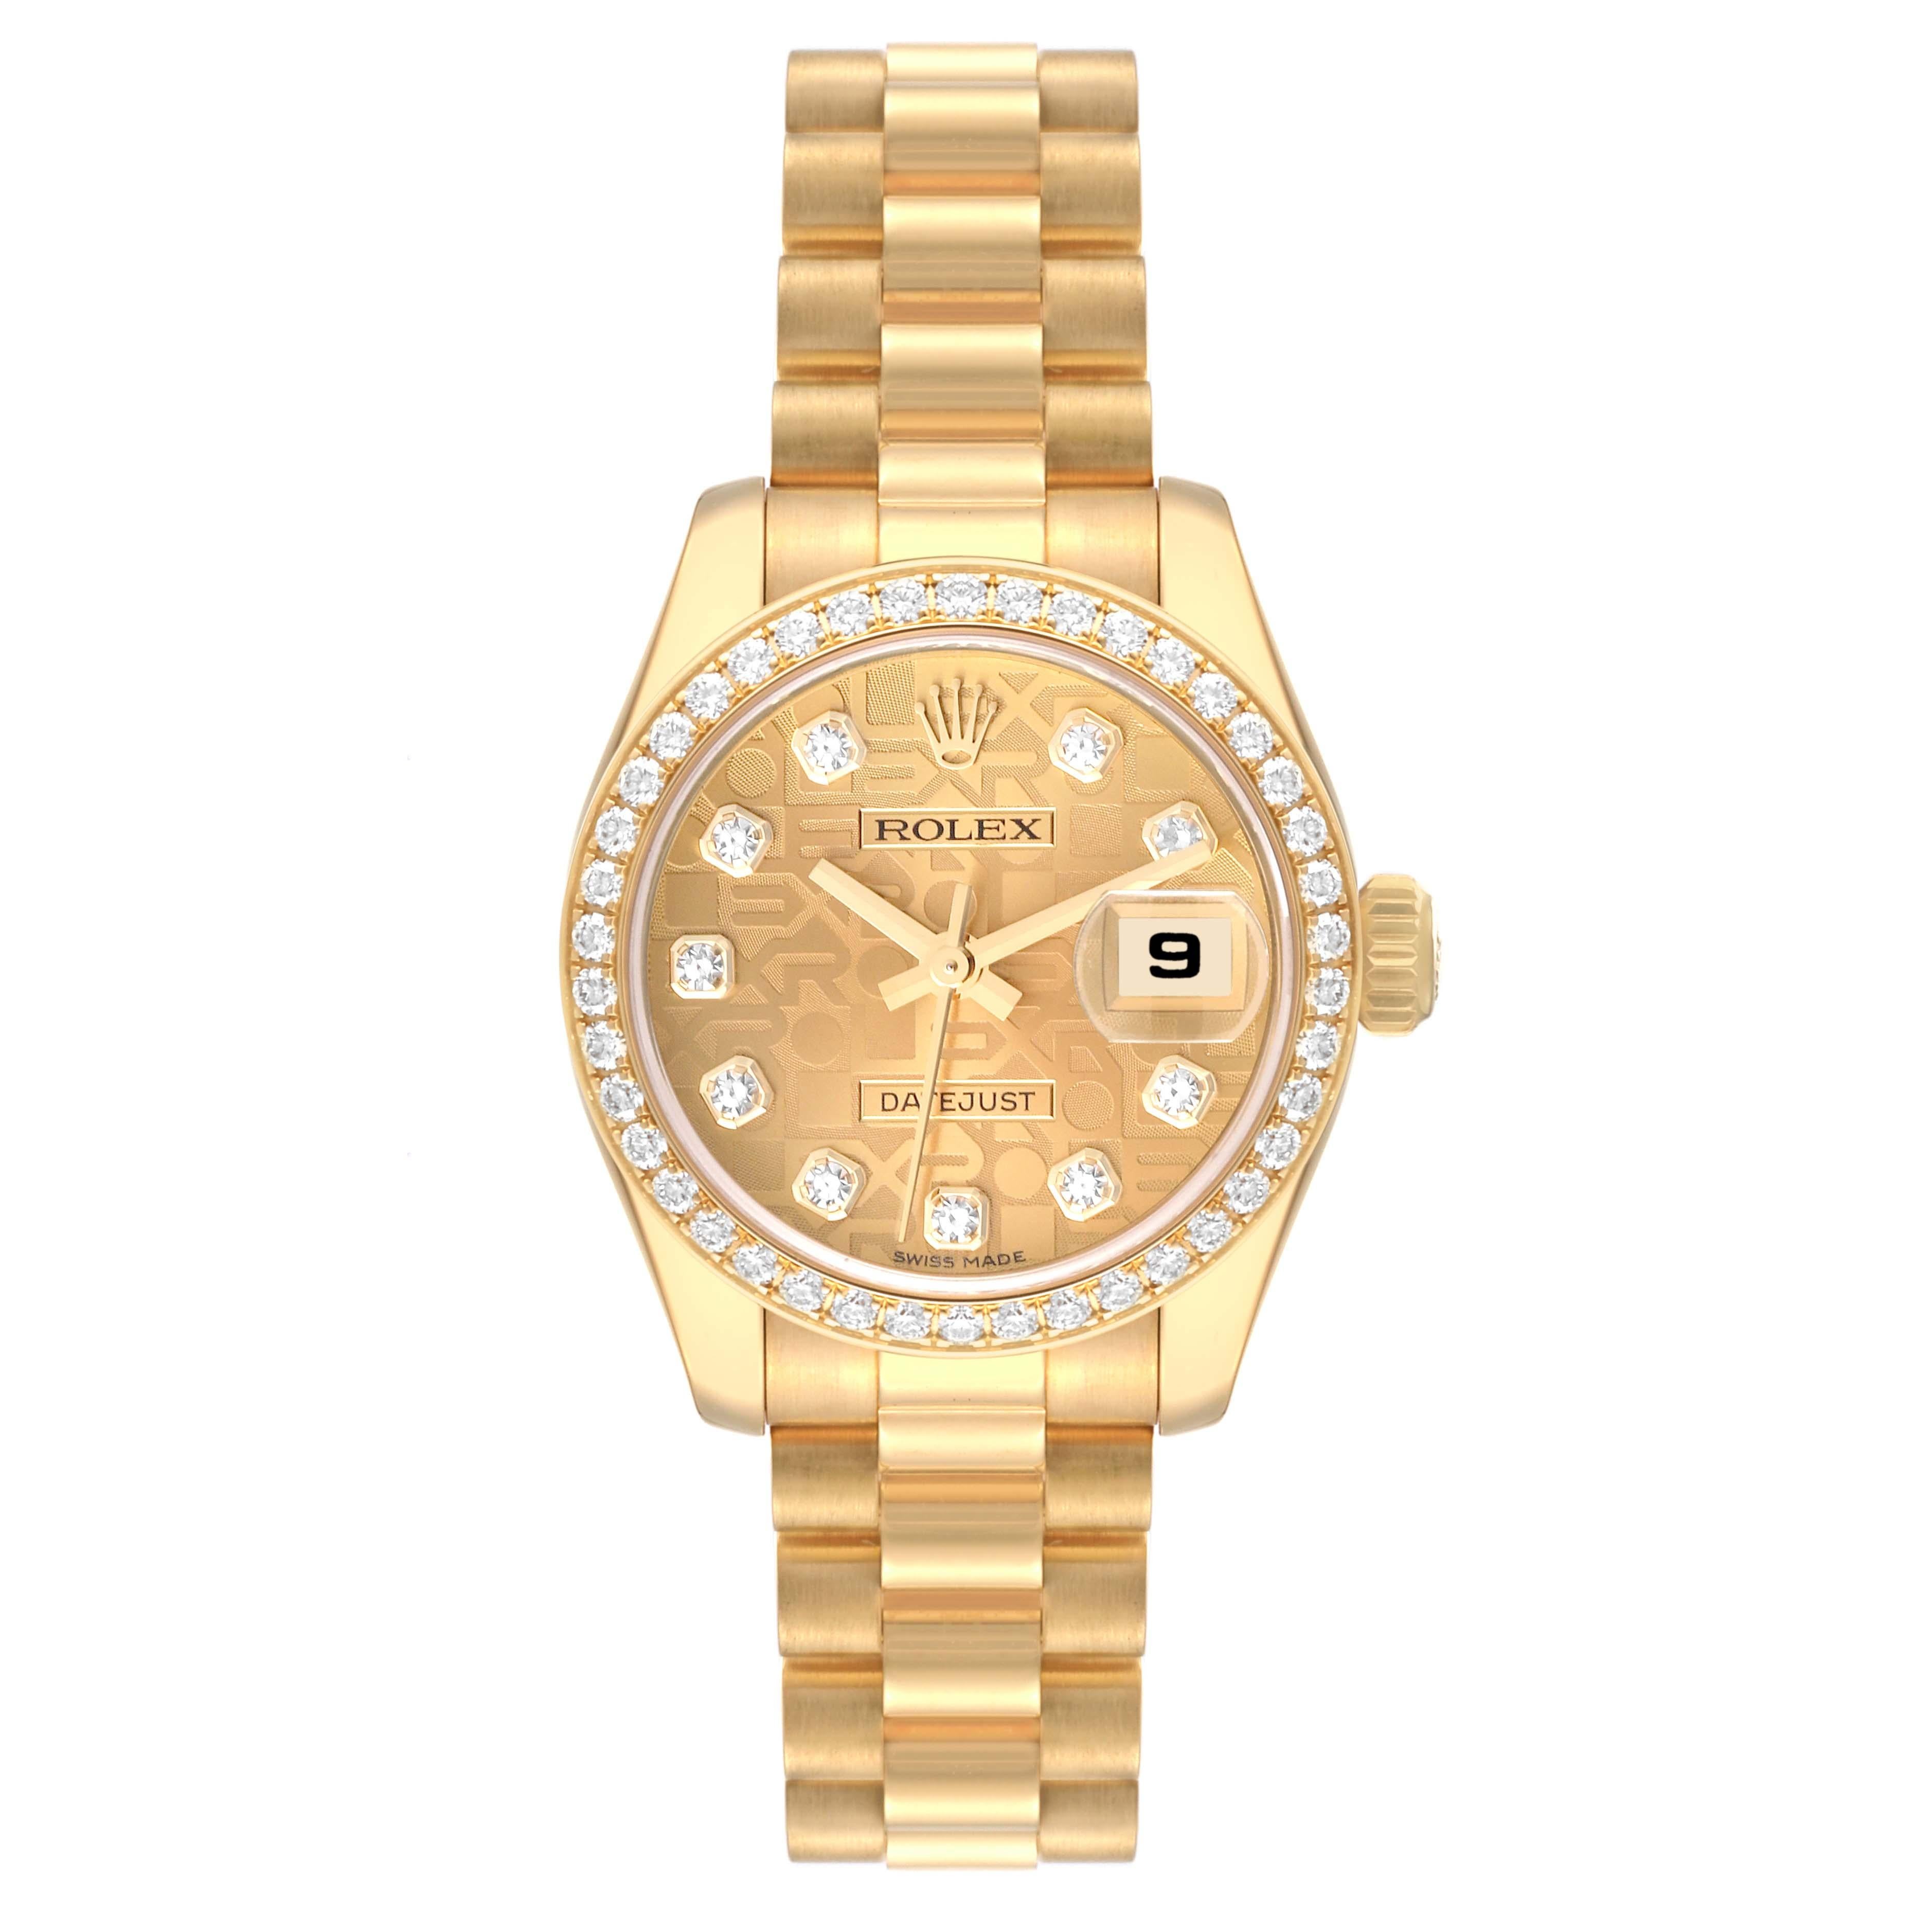 Rolex President Yellow Gold Anniversary Dial Diamond Ladies Watch 179138. Officially certified chronometer self-winding movement. 18k yellow gold oyster case 26.0 mm in diameter. Rolex logo on a crown. 18k yellow gold original Rolex factory diamond